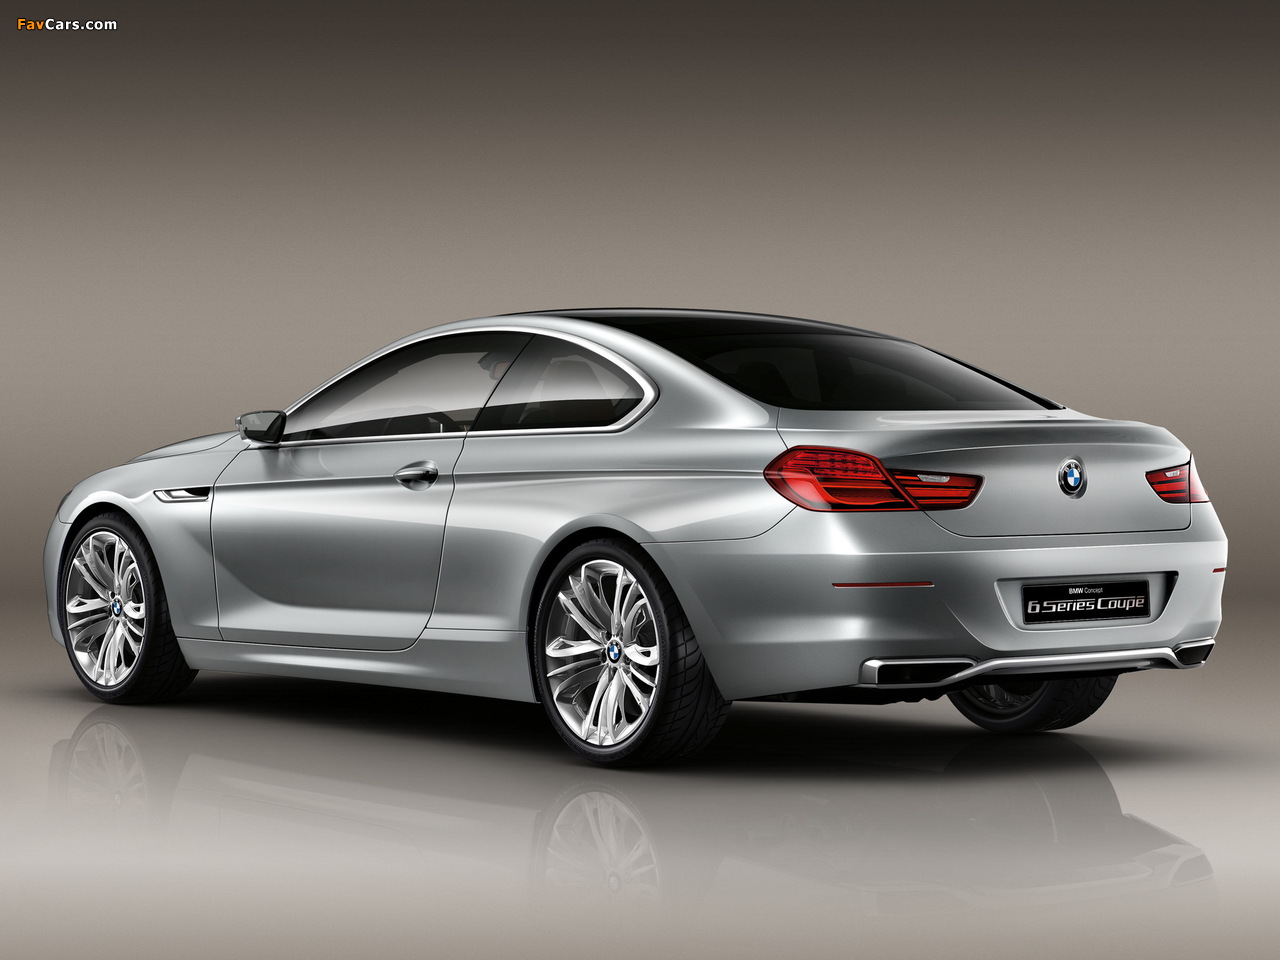 BMW 6 Series Coupe Concept (F12) 2010 pictures (1280 x 960)